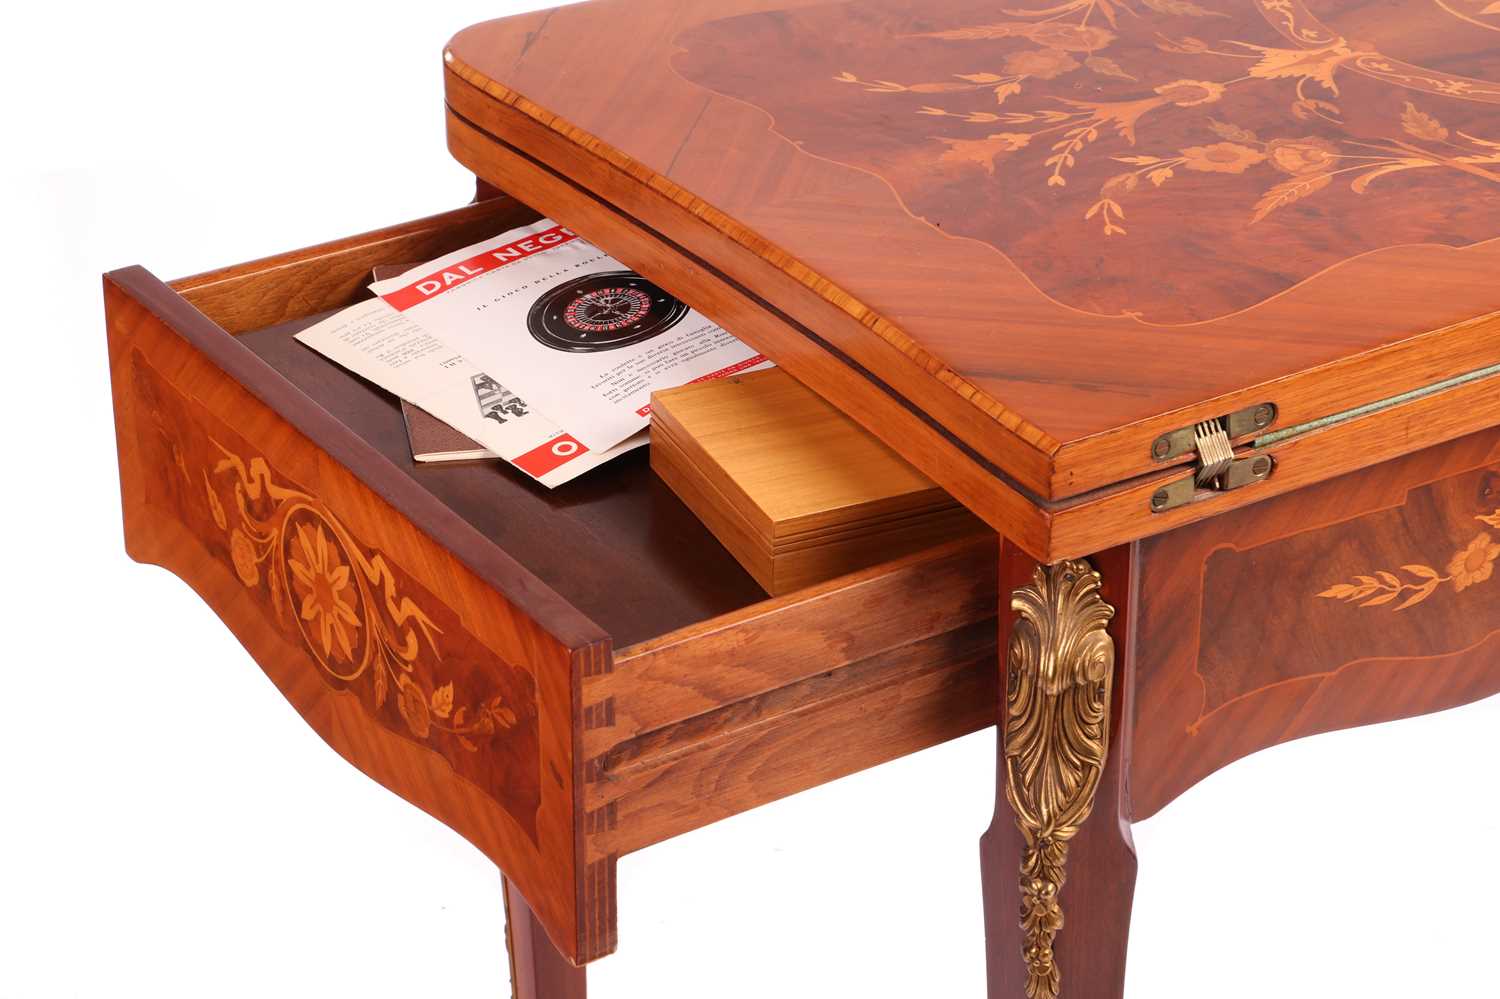 An Italian Dal Negro walnut and marquetry gaming/roulette table, and gaming compendium the fold over - Image 6 of 8